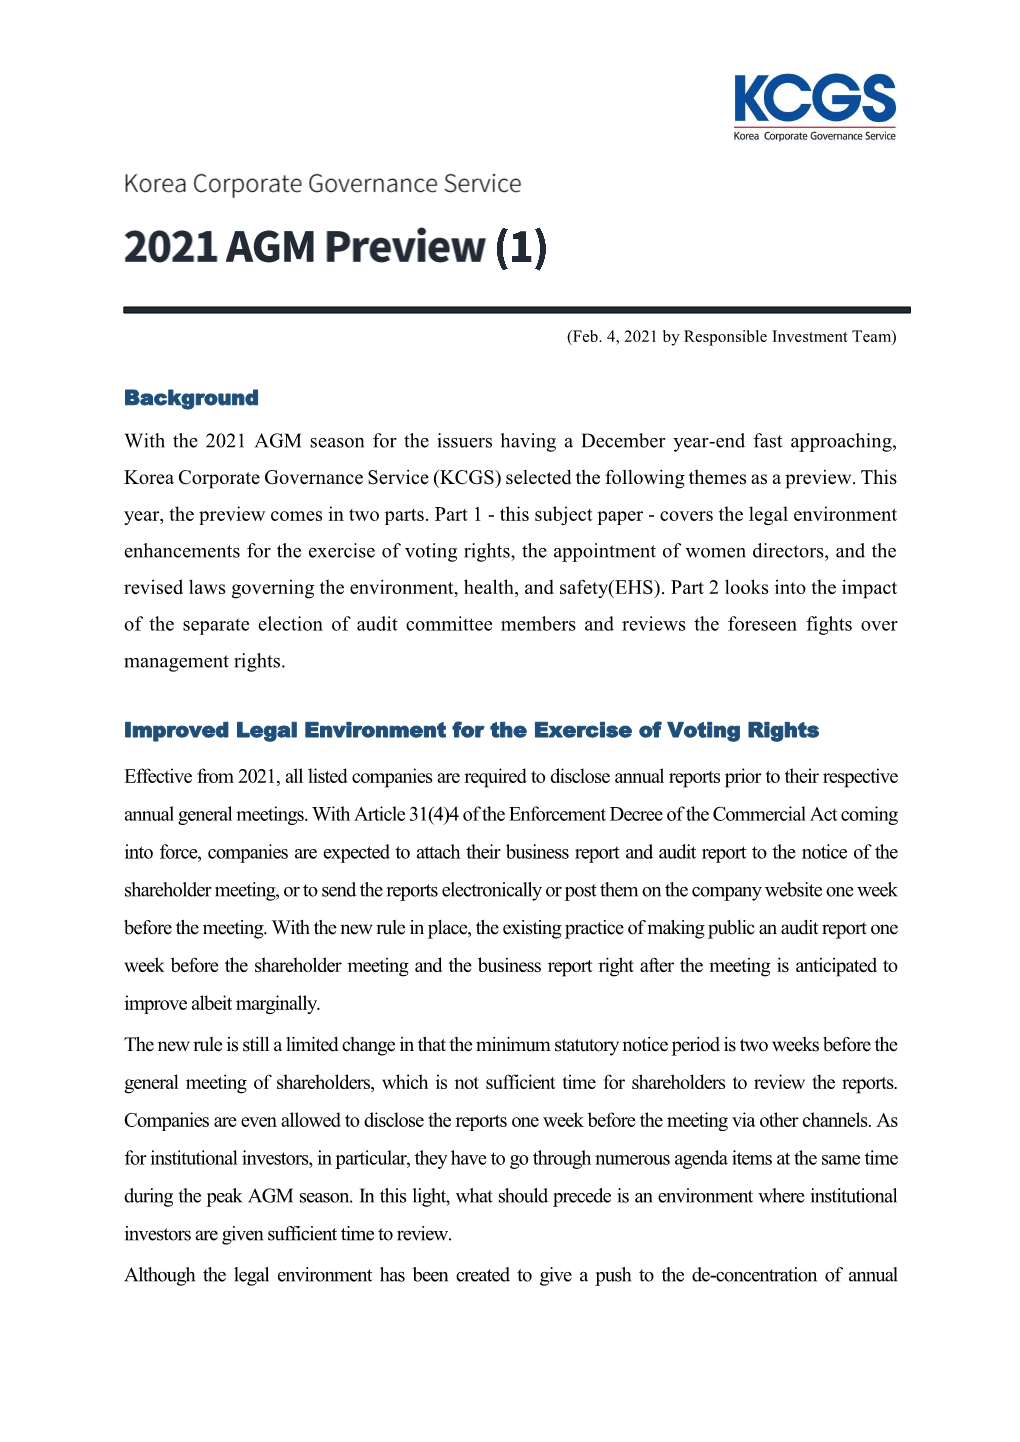 2021 AGM Preview(1)